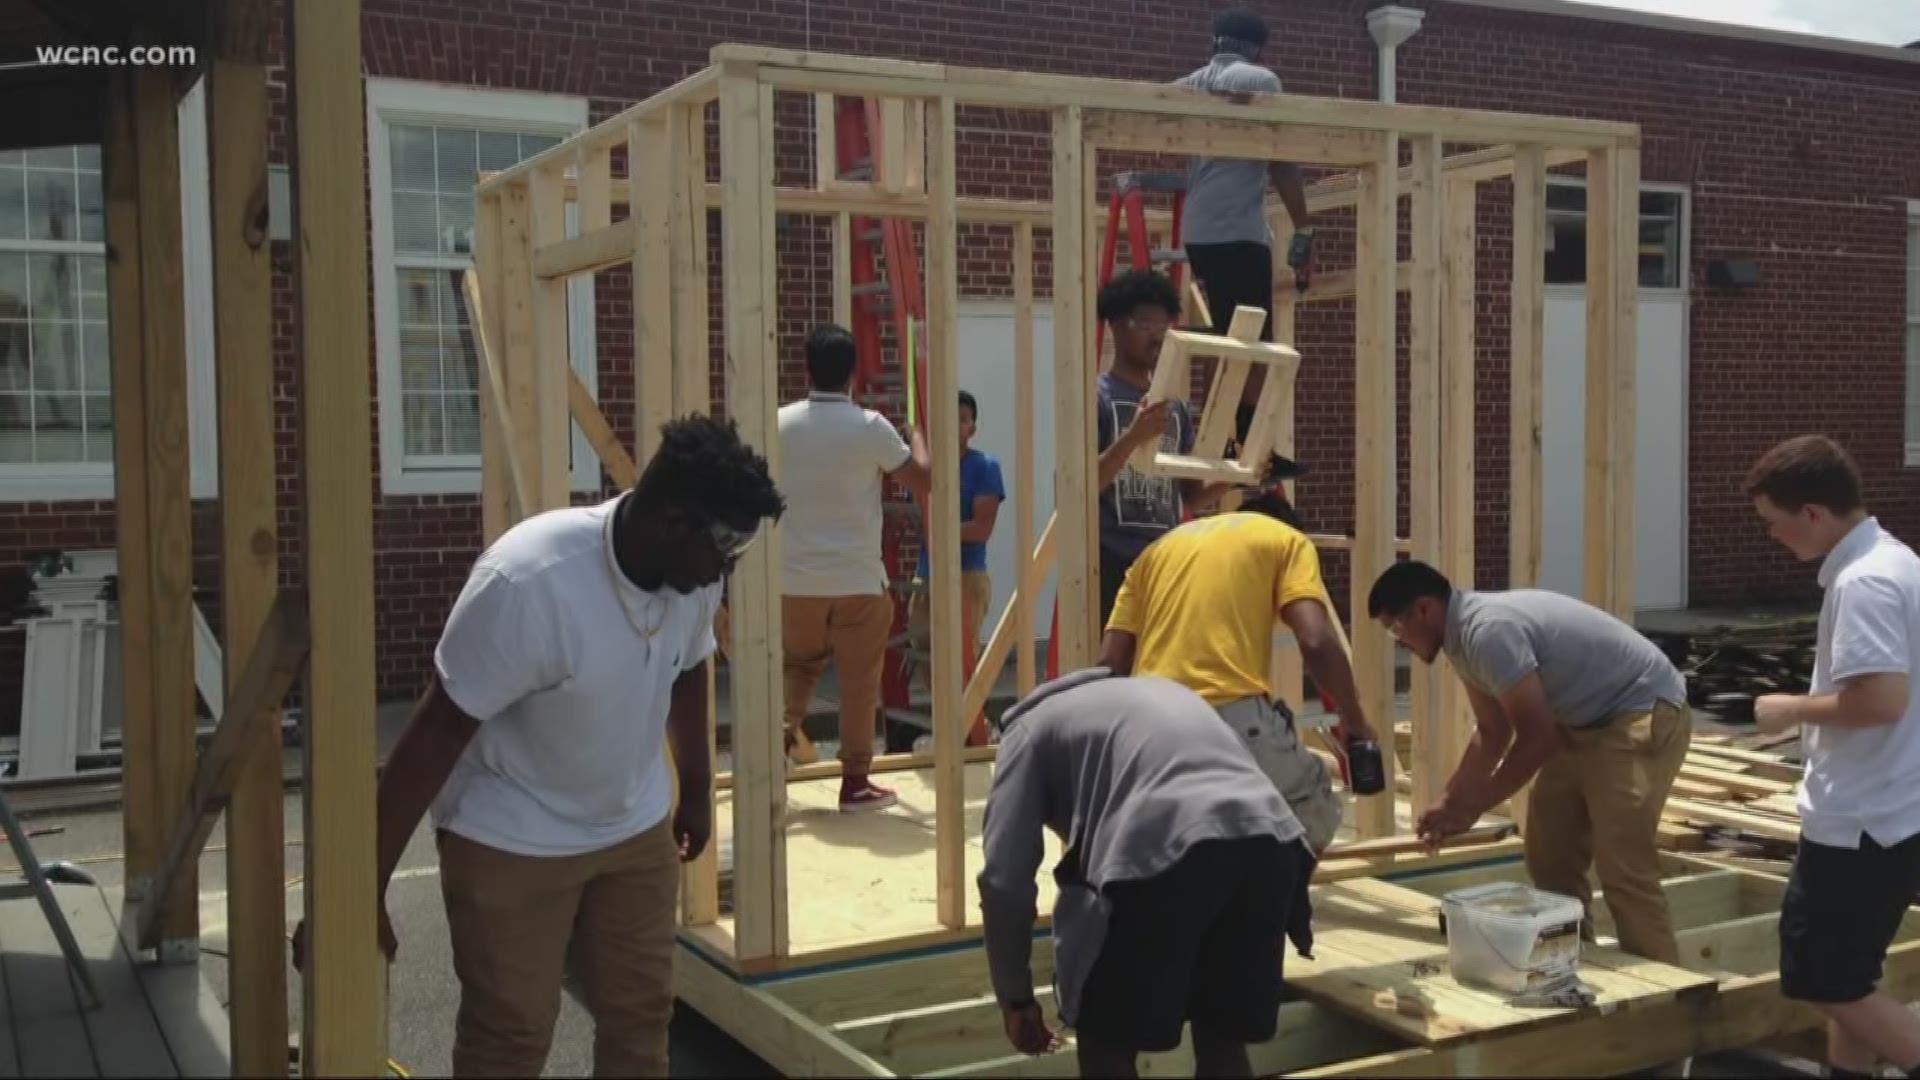 Students tell WCNC they are learning more than how to build, they are learning to build community.